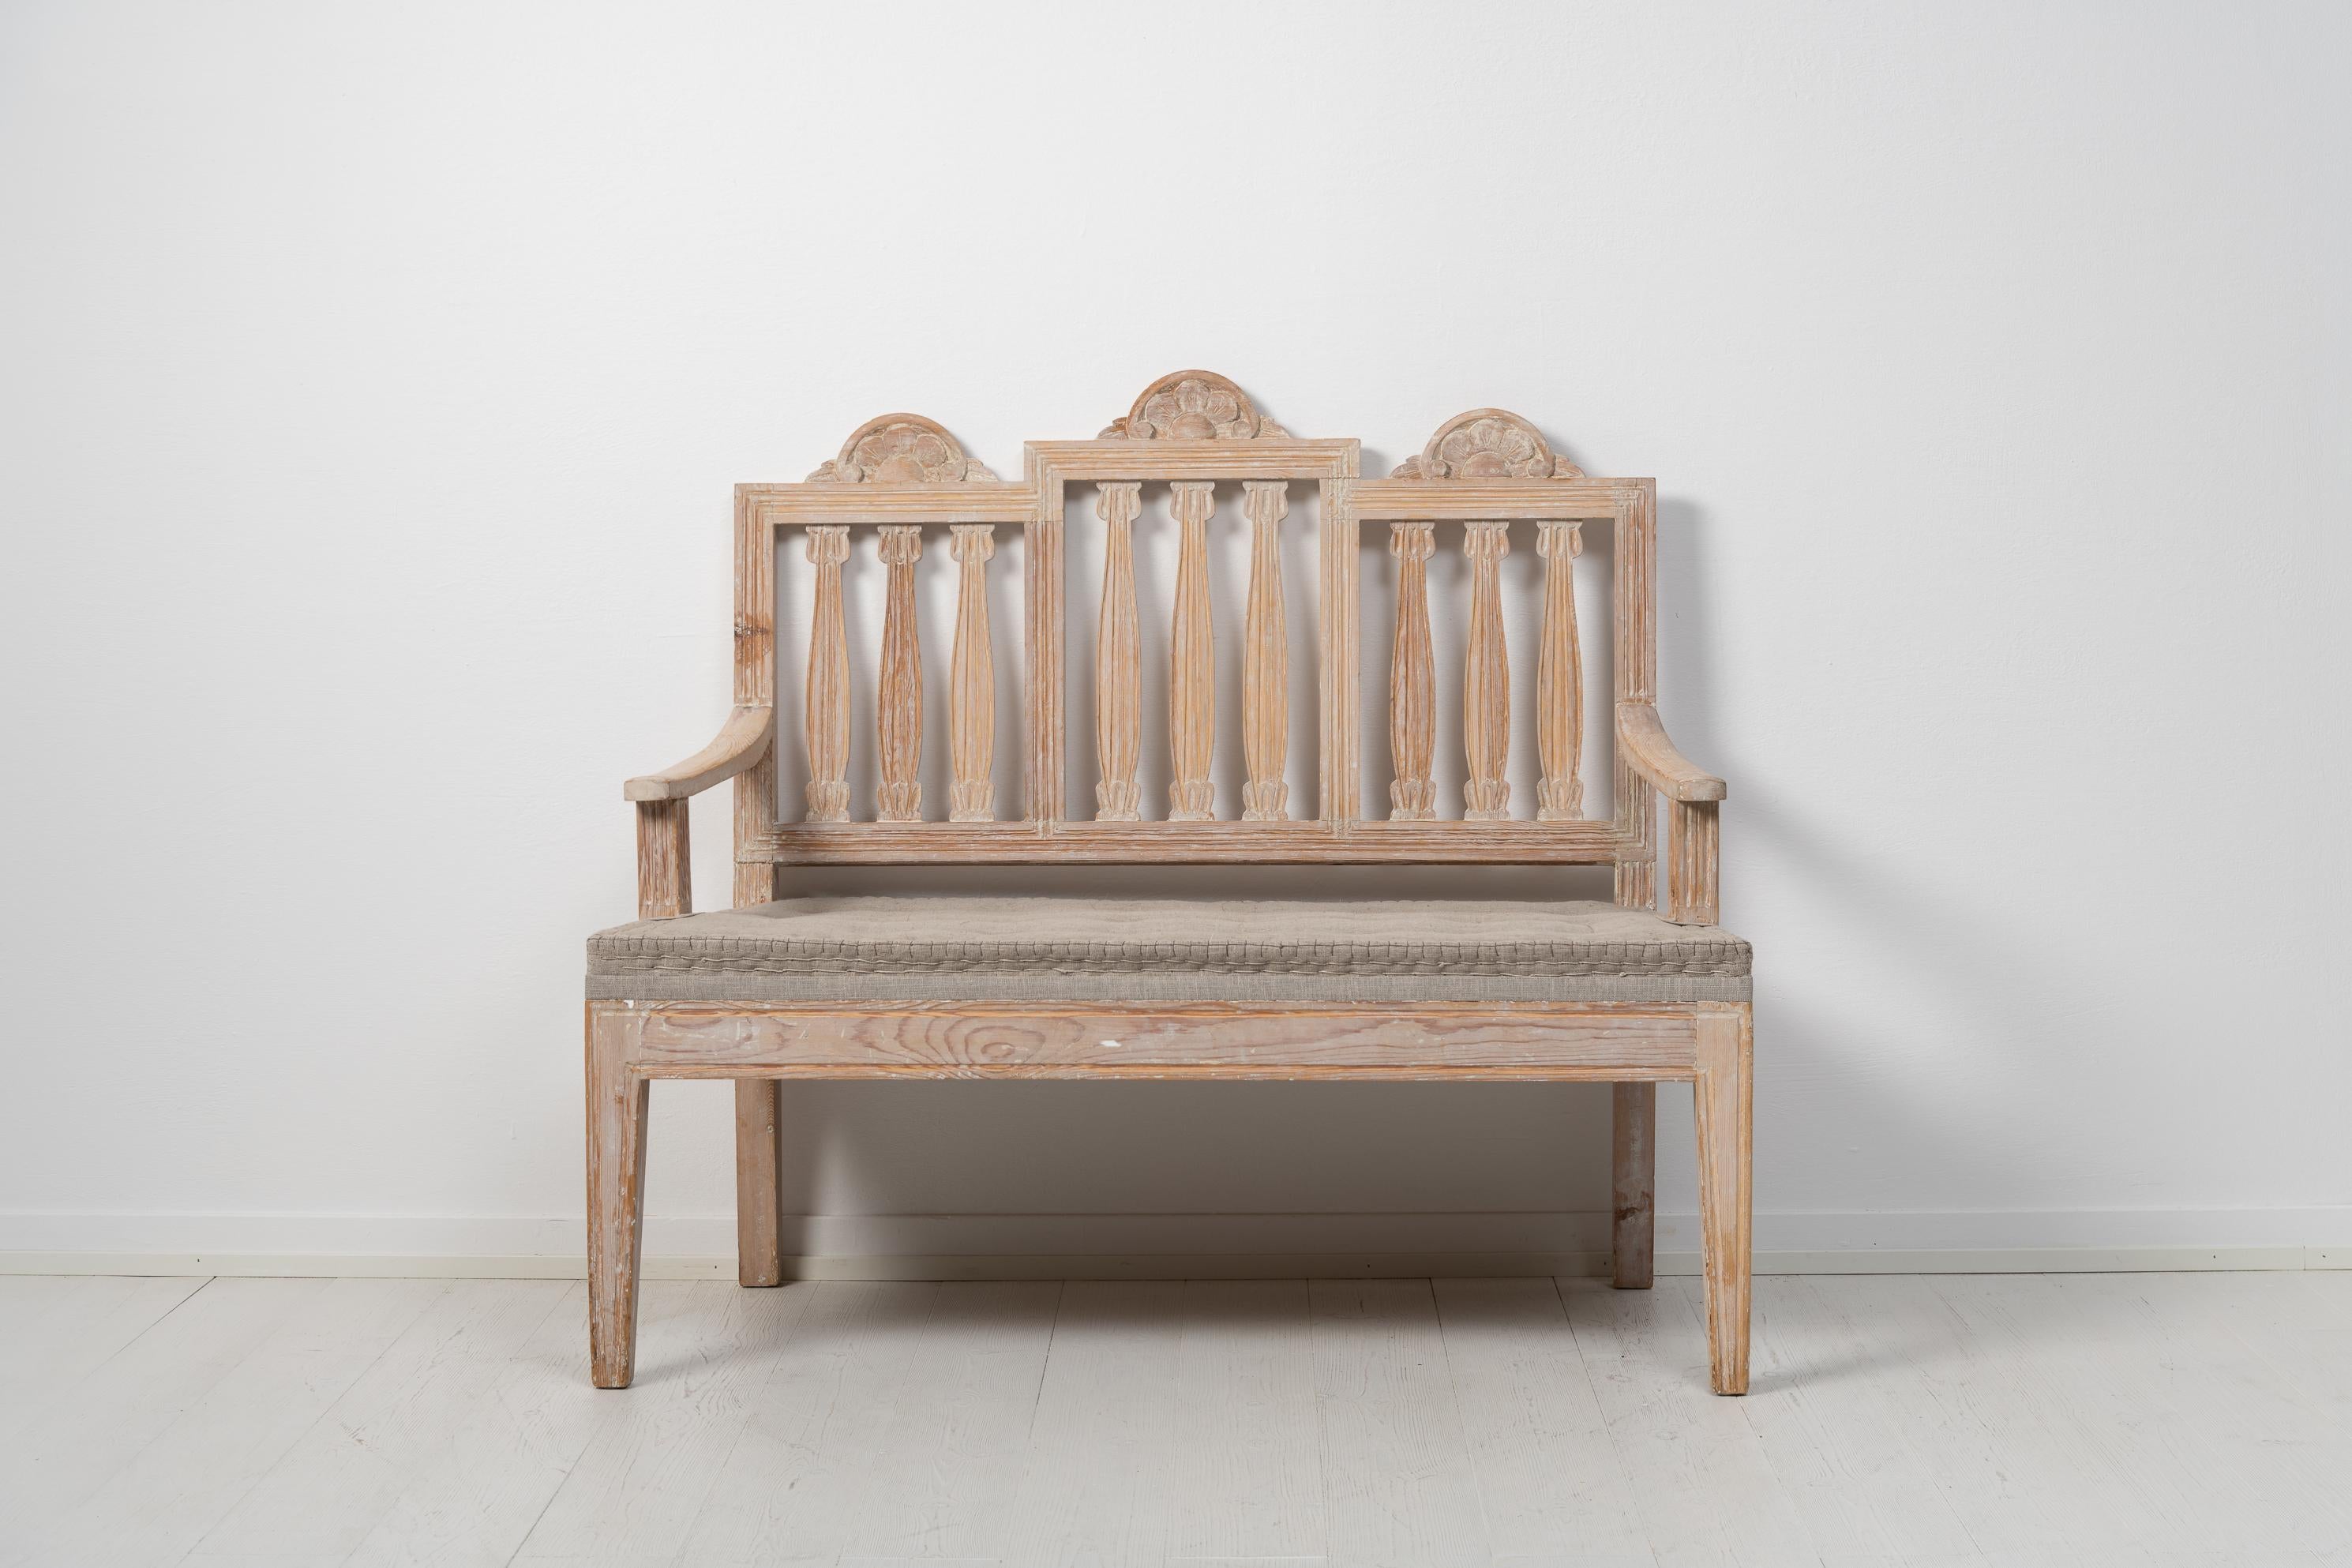 Swedish small sofa in gustavian style. The back of the sofa consist of 3 sections with the typical gustavian decor and shape. The sofa is from the late 1800s and made in pine. Hand carved wooden decor and straight legs with flutes. The sofa has